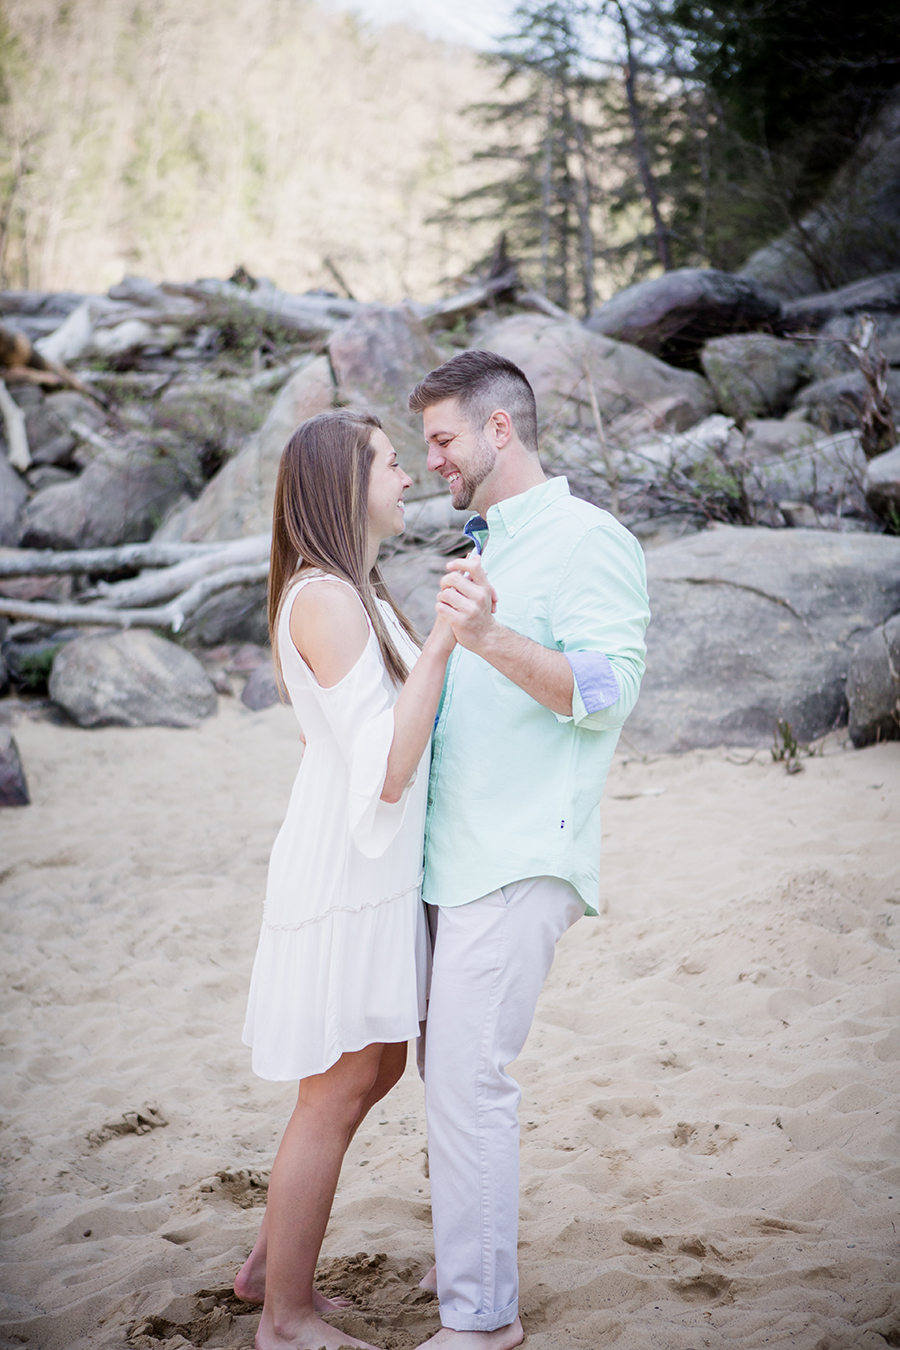 Dancing in the sand engagement photo by Knoxville Wedding Photographer, Amanda May Photos.